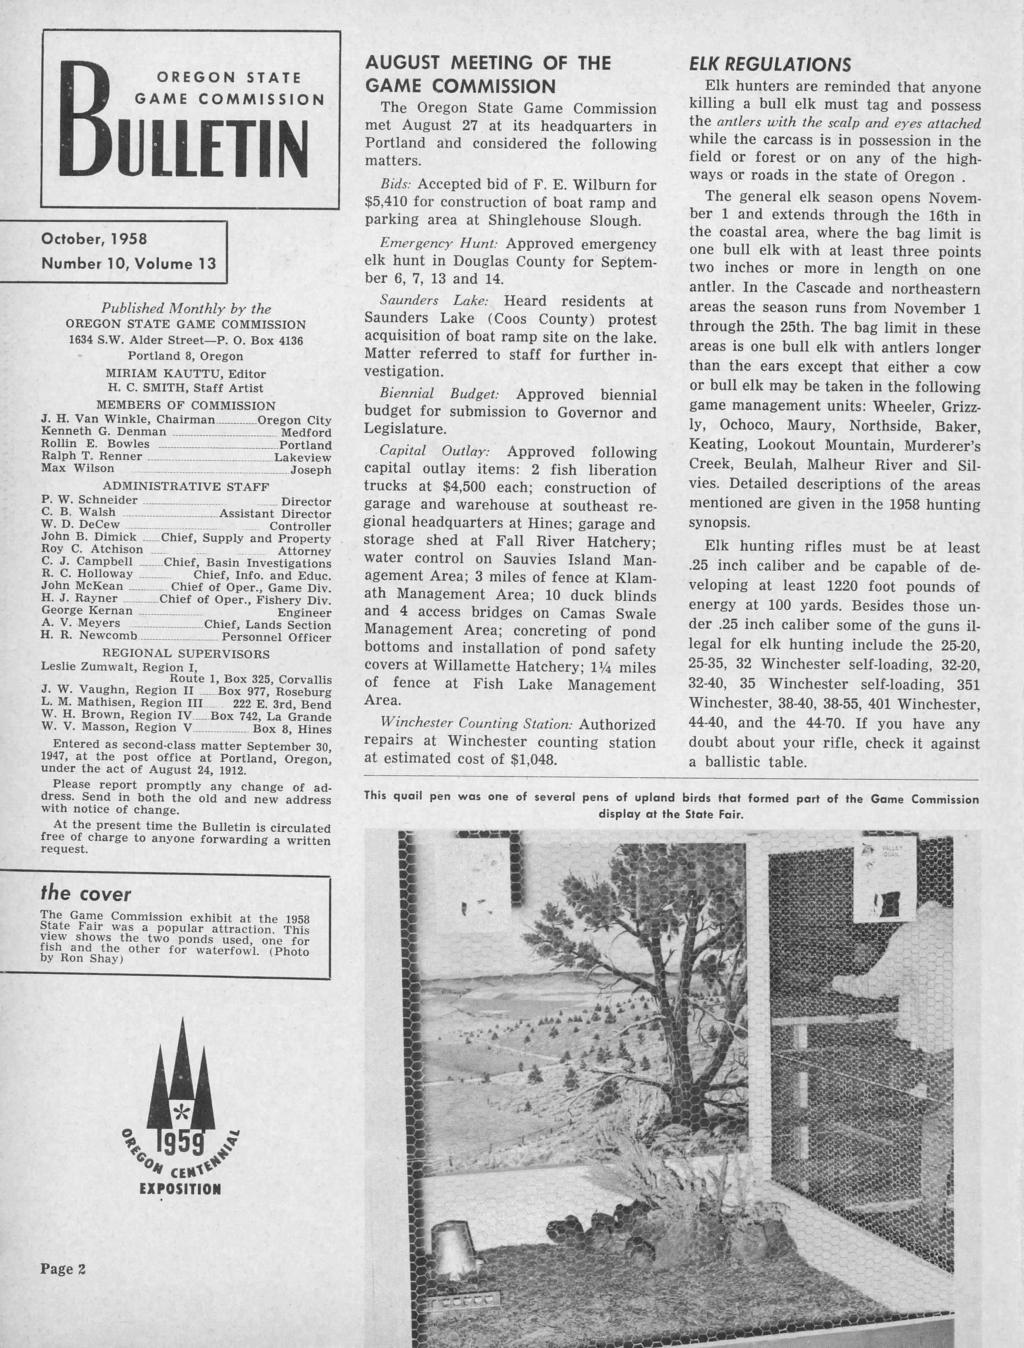 GAME October, 1958 45 STATE COMMISSION ULITTIN Number 10, Volume 13 Published Monthly by the OREGON STATE GAME COMMISSION 1634 S.W. Alder StreetP. 0.